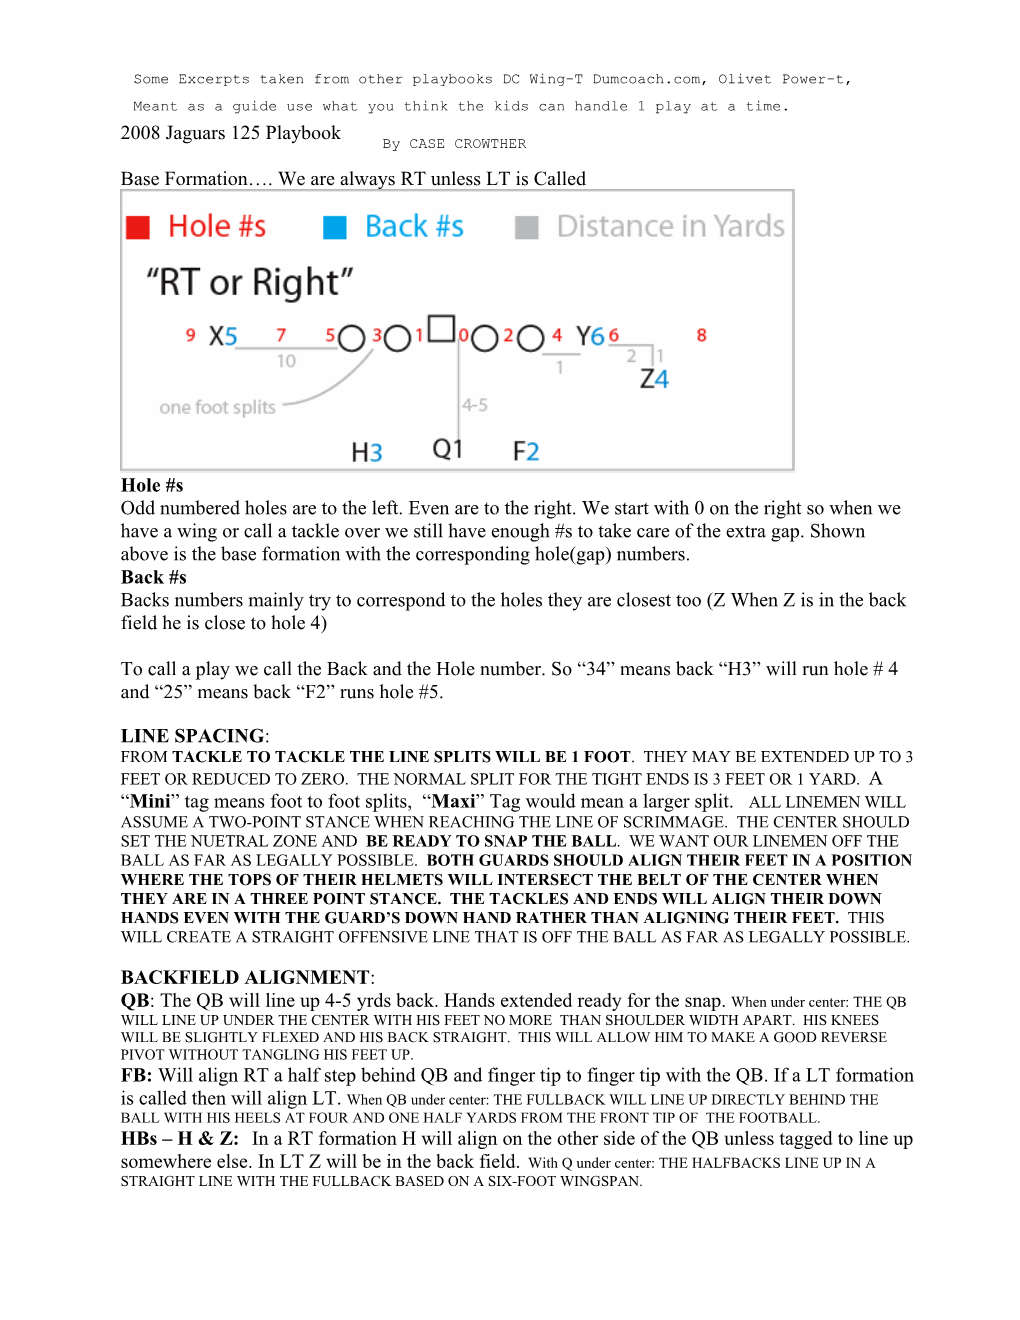 2008 Jaguars 125 Playbook Base Formation…. We Are Always RT